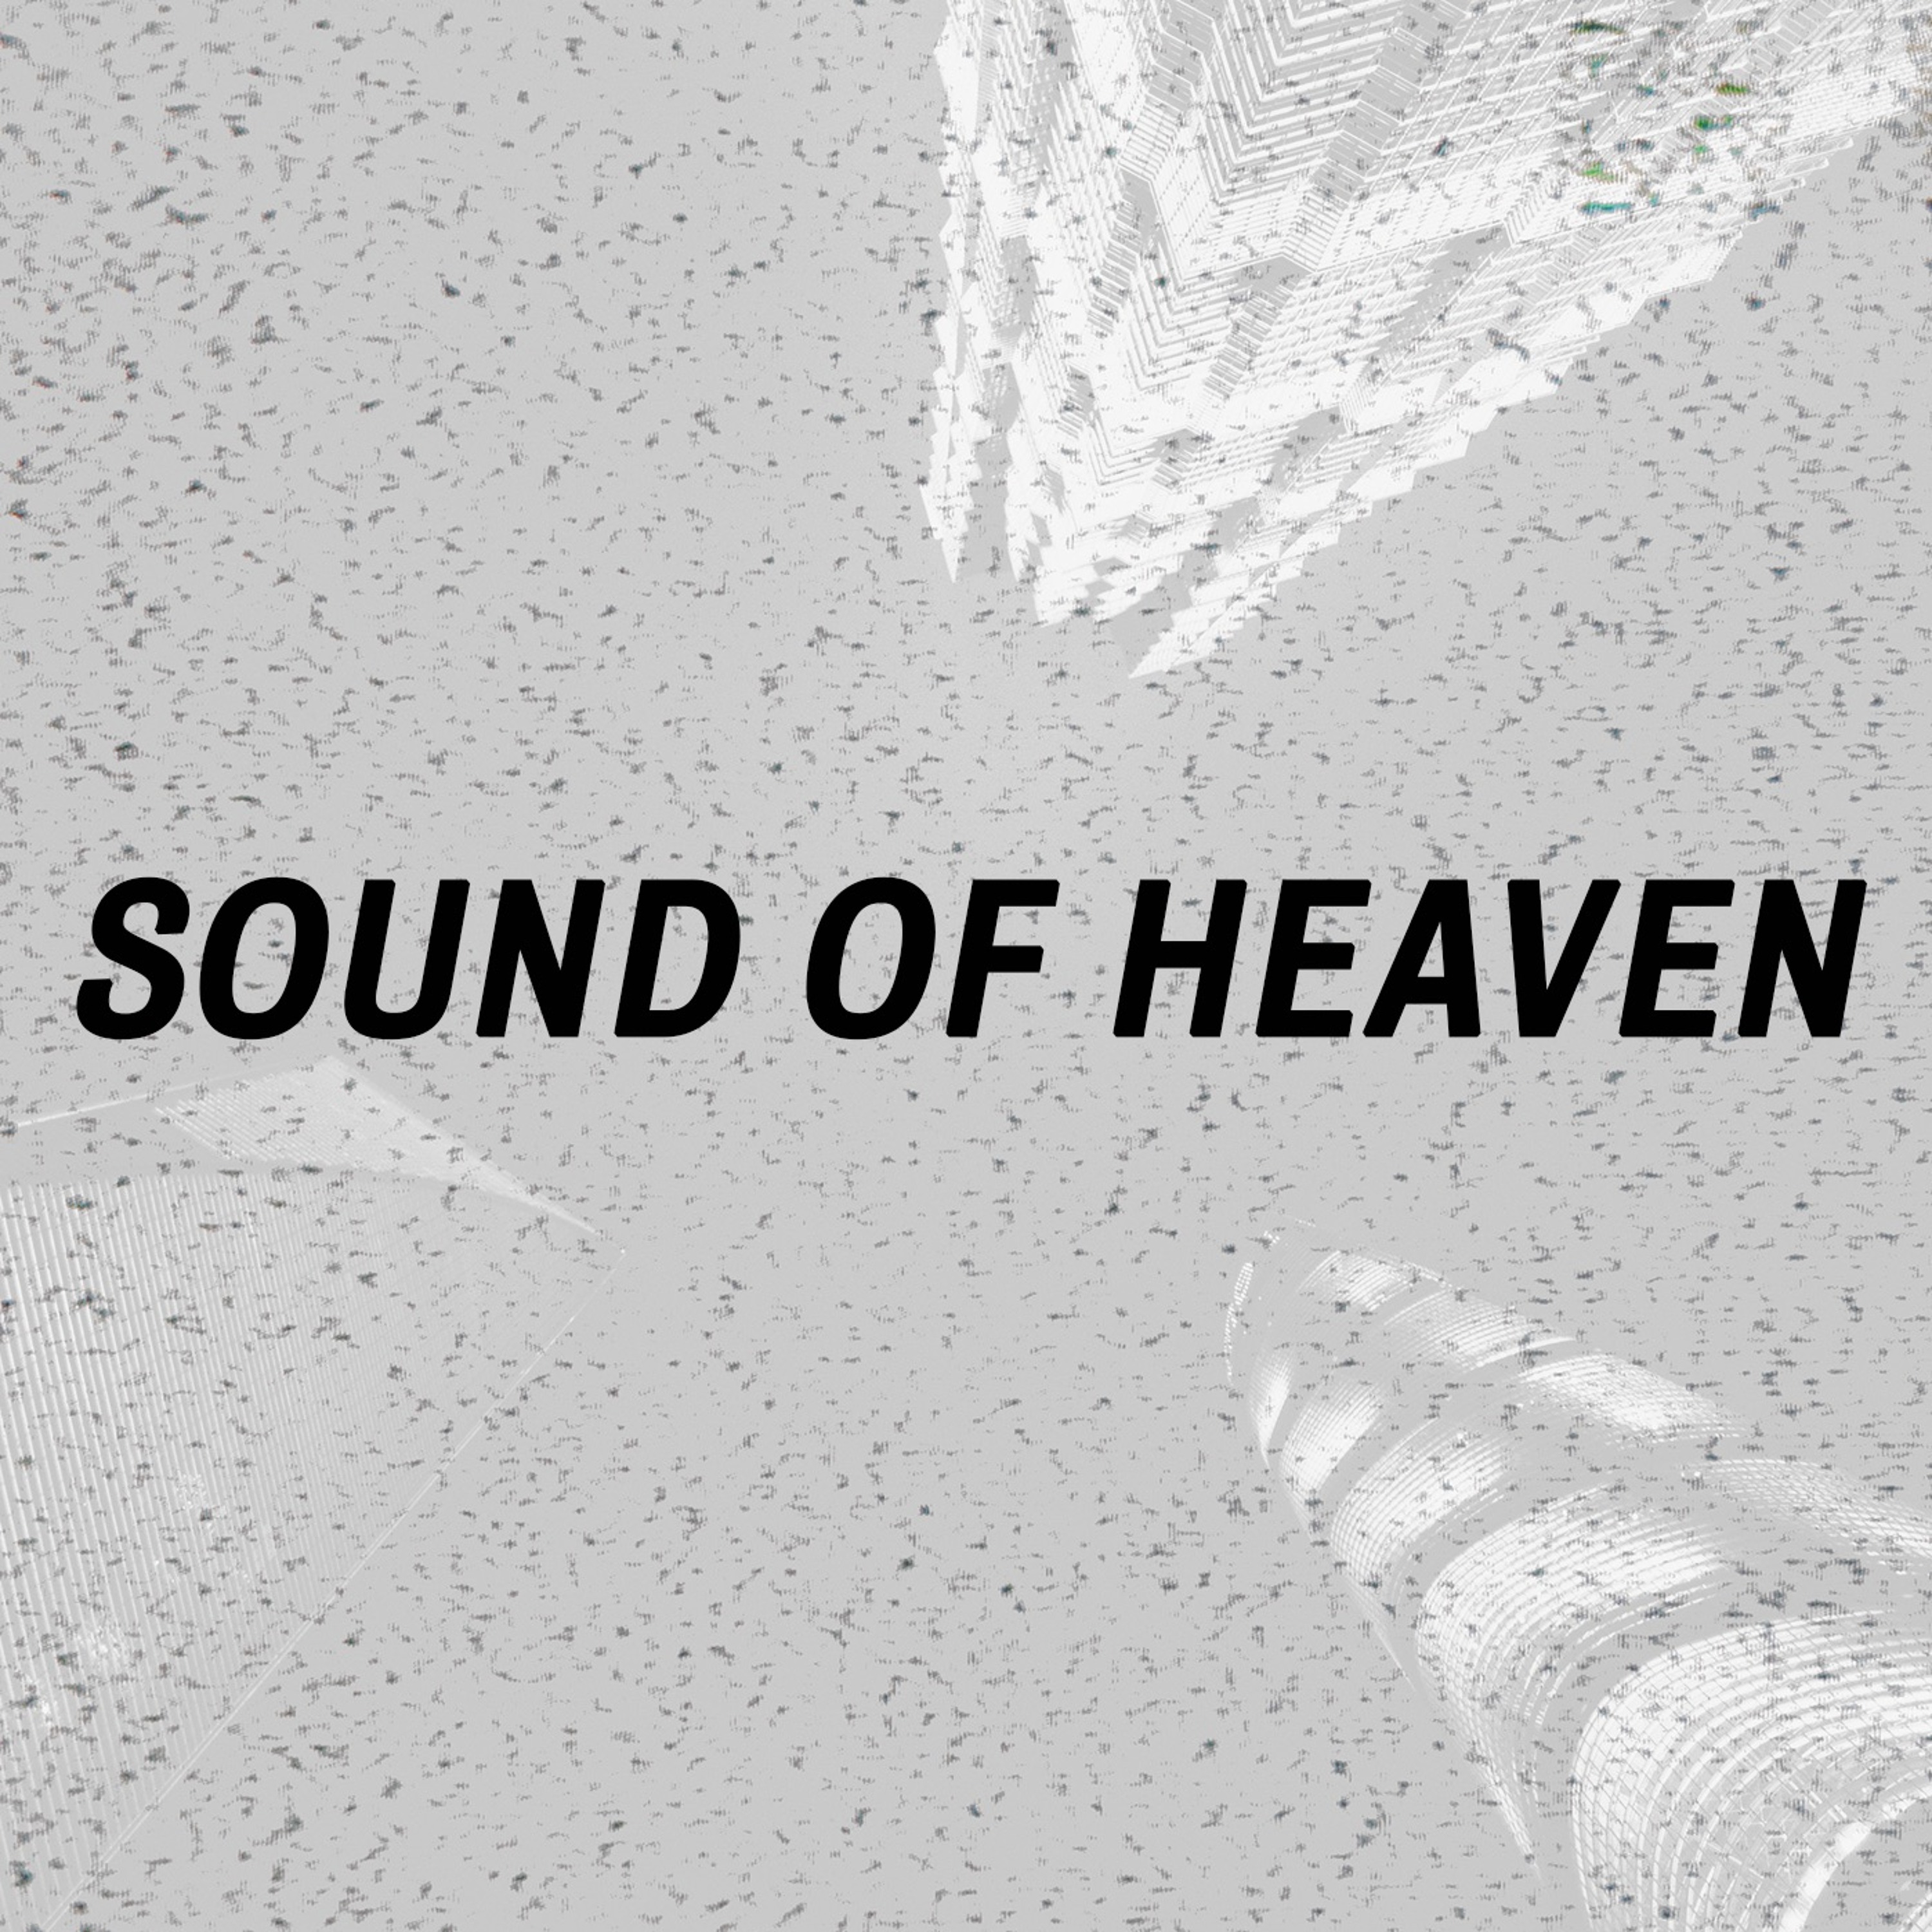 Sound of Heaven Part 1 - This Is What Heaven Sounds Like